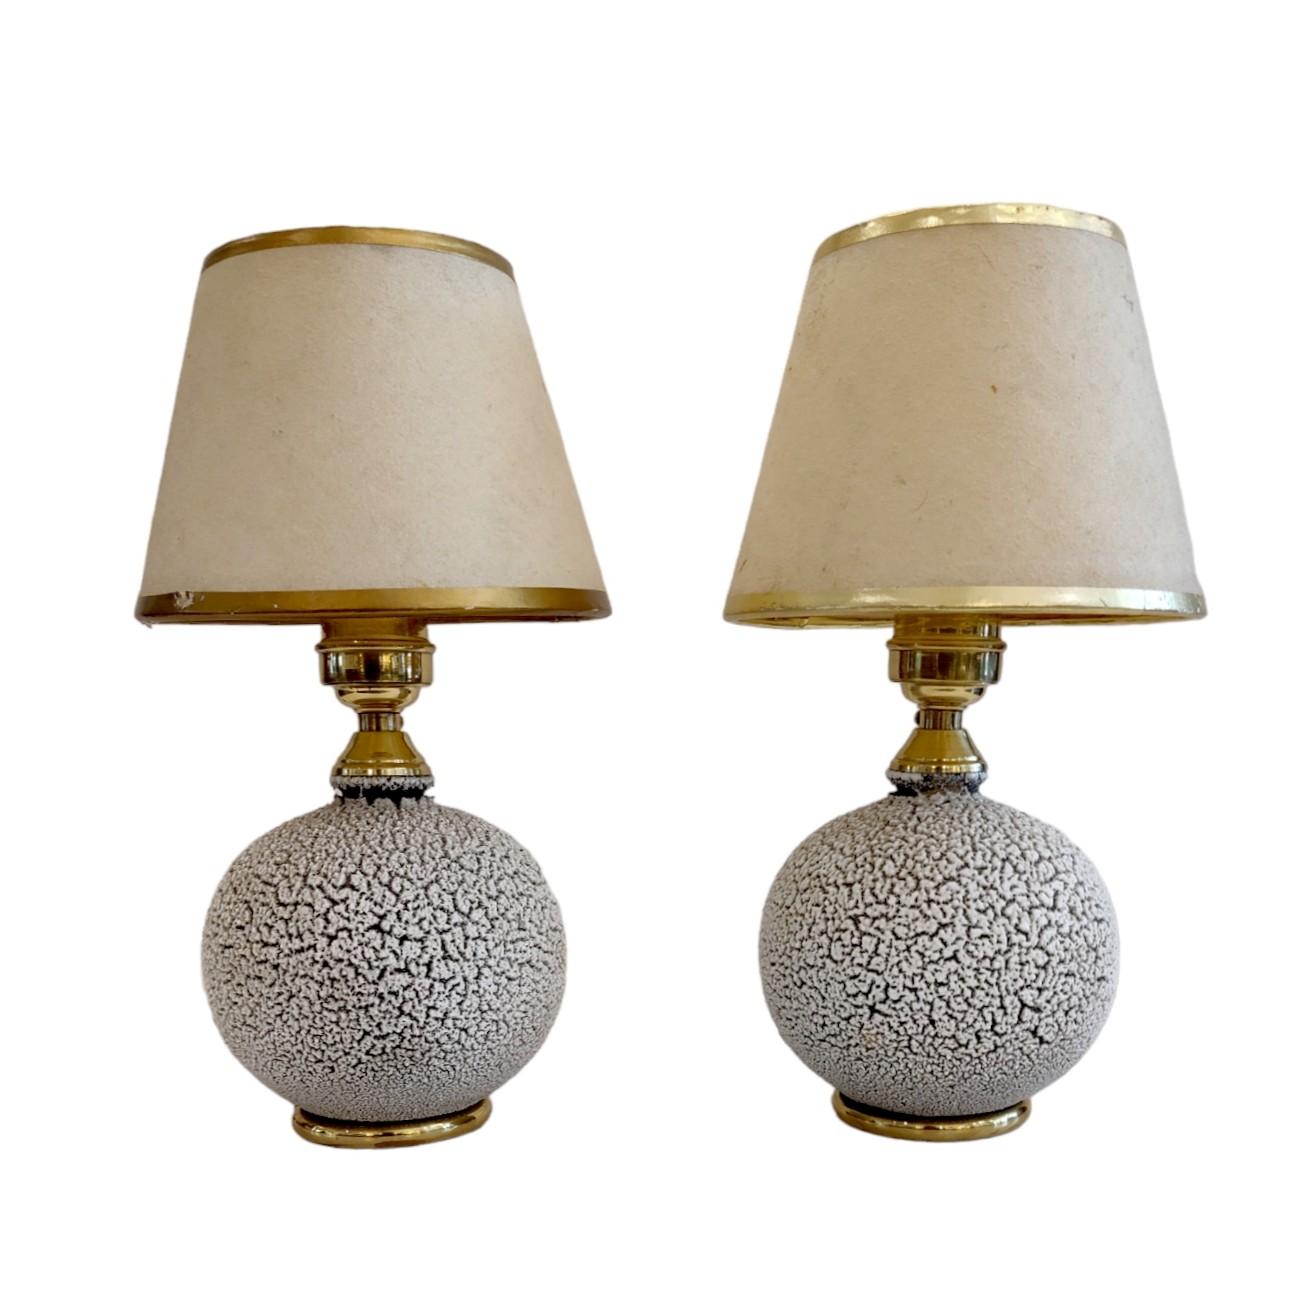 Paul Milet Style French Art Deco Table Lamps, 1930s For Sale 1